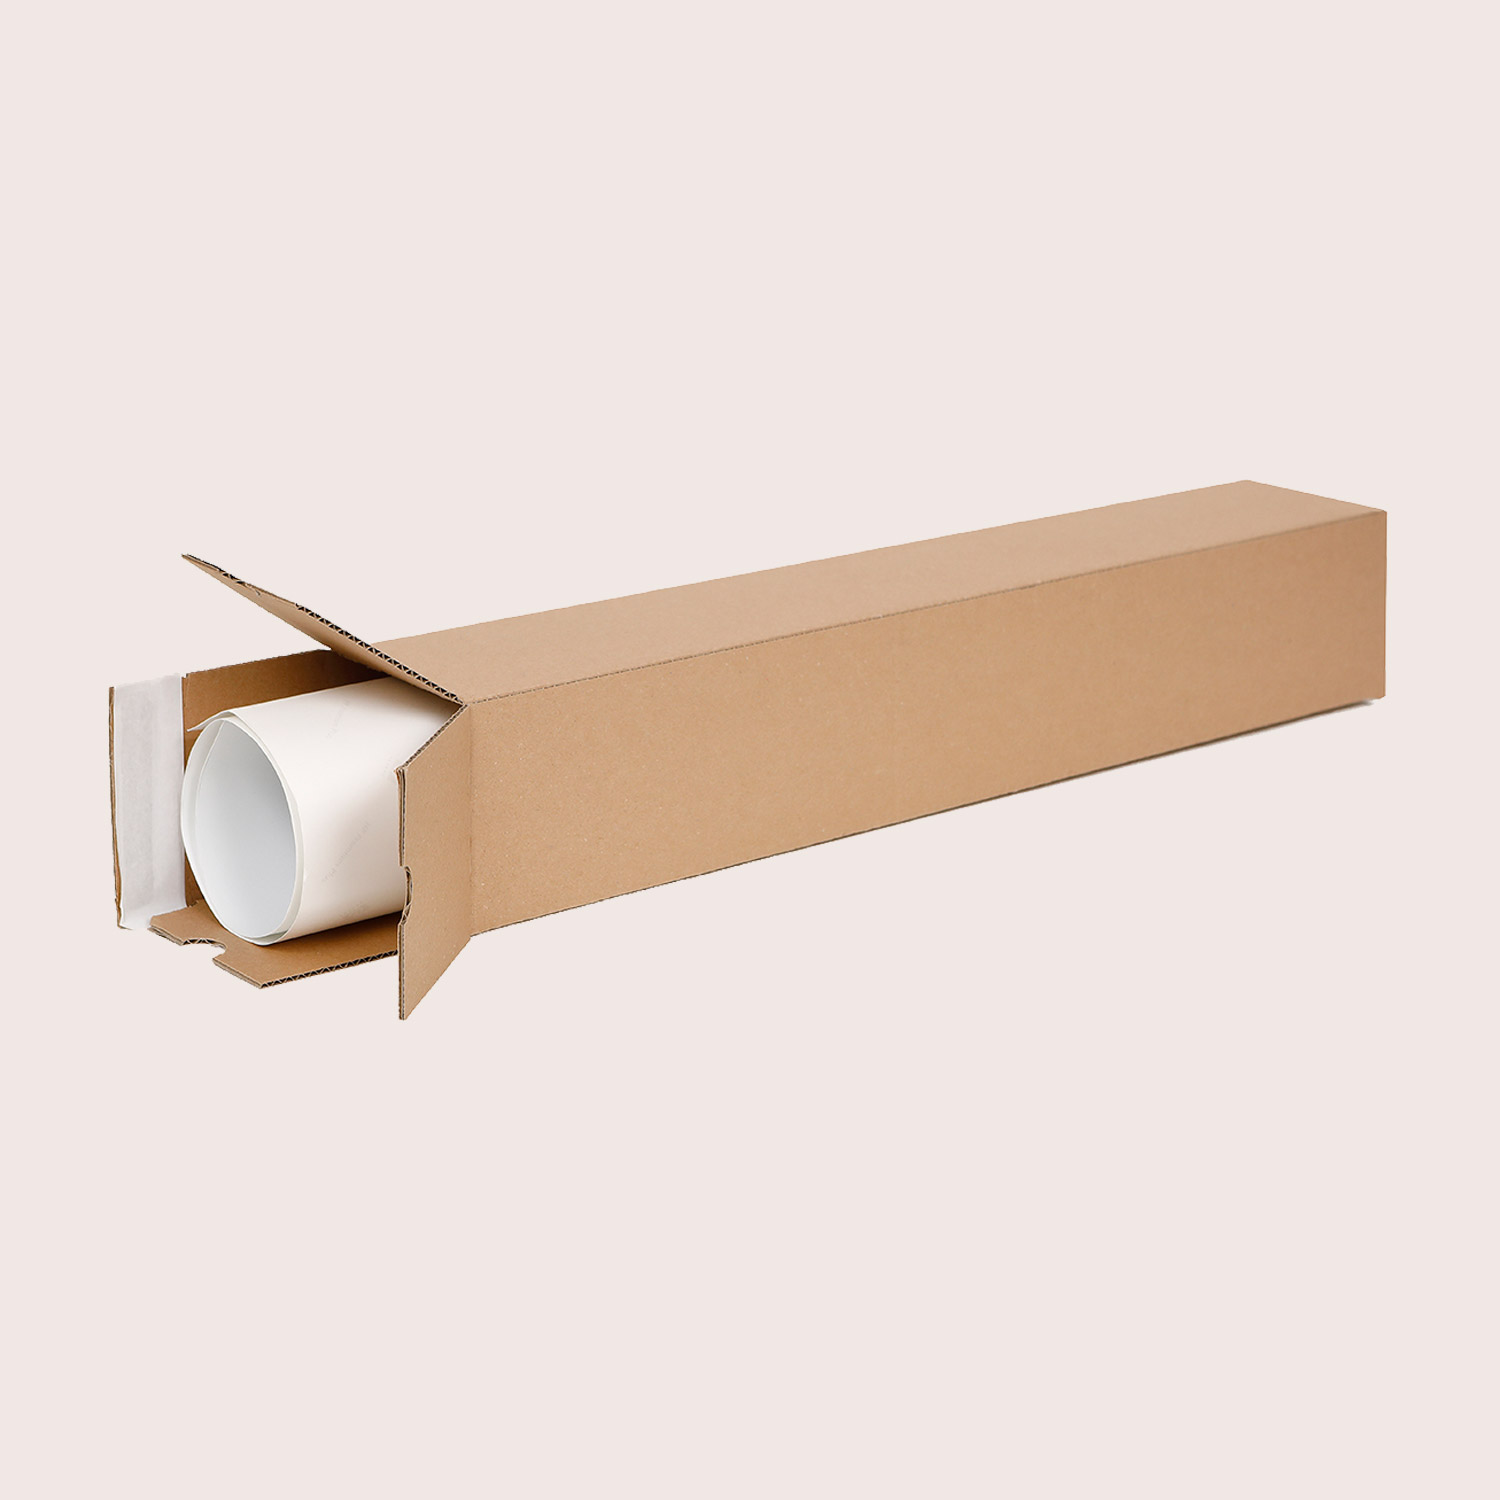 Rectangular shipping sleeves made from corrugated cardboard